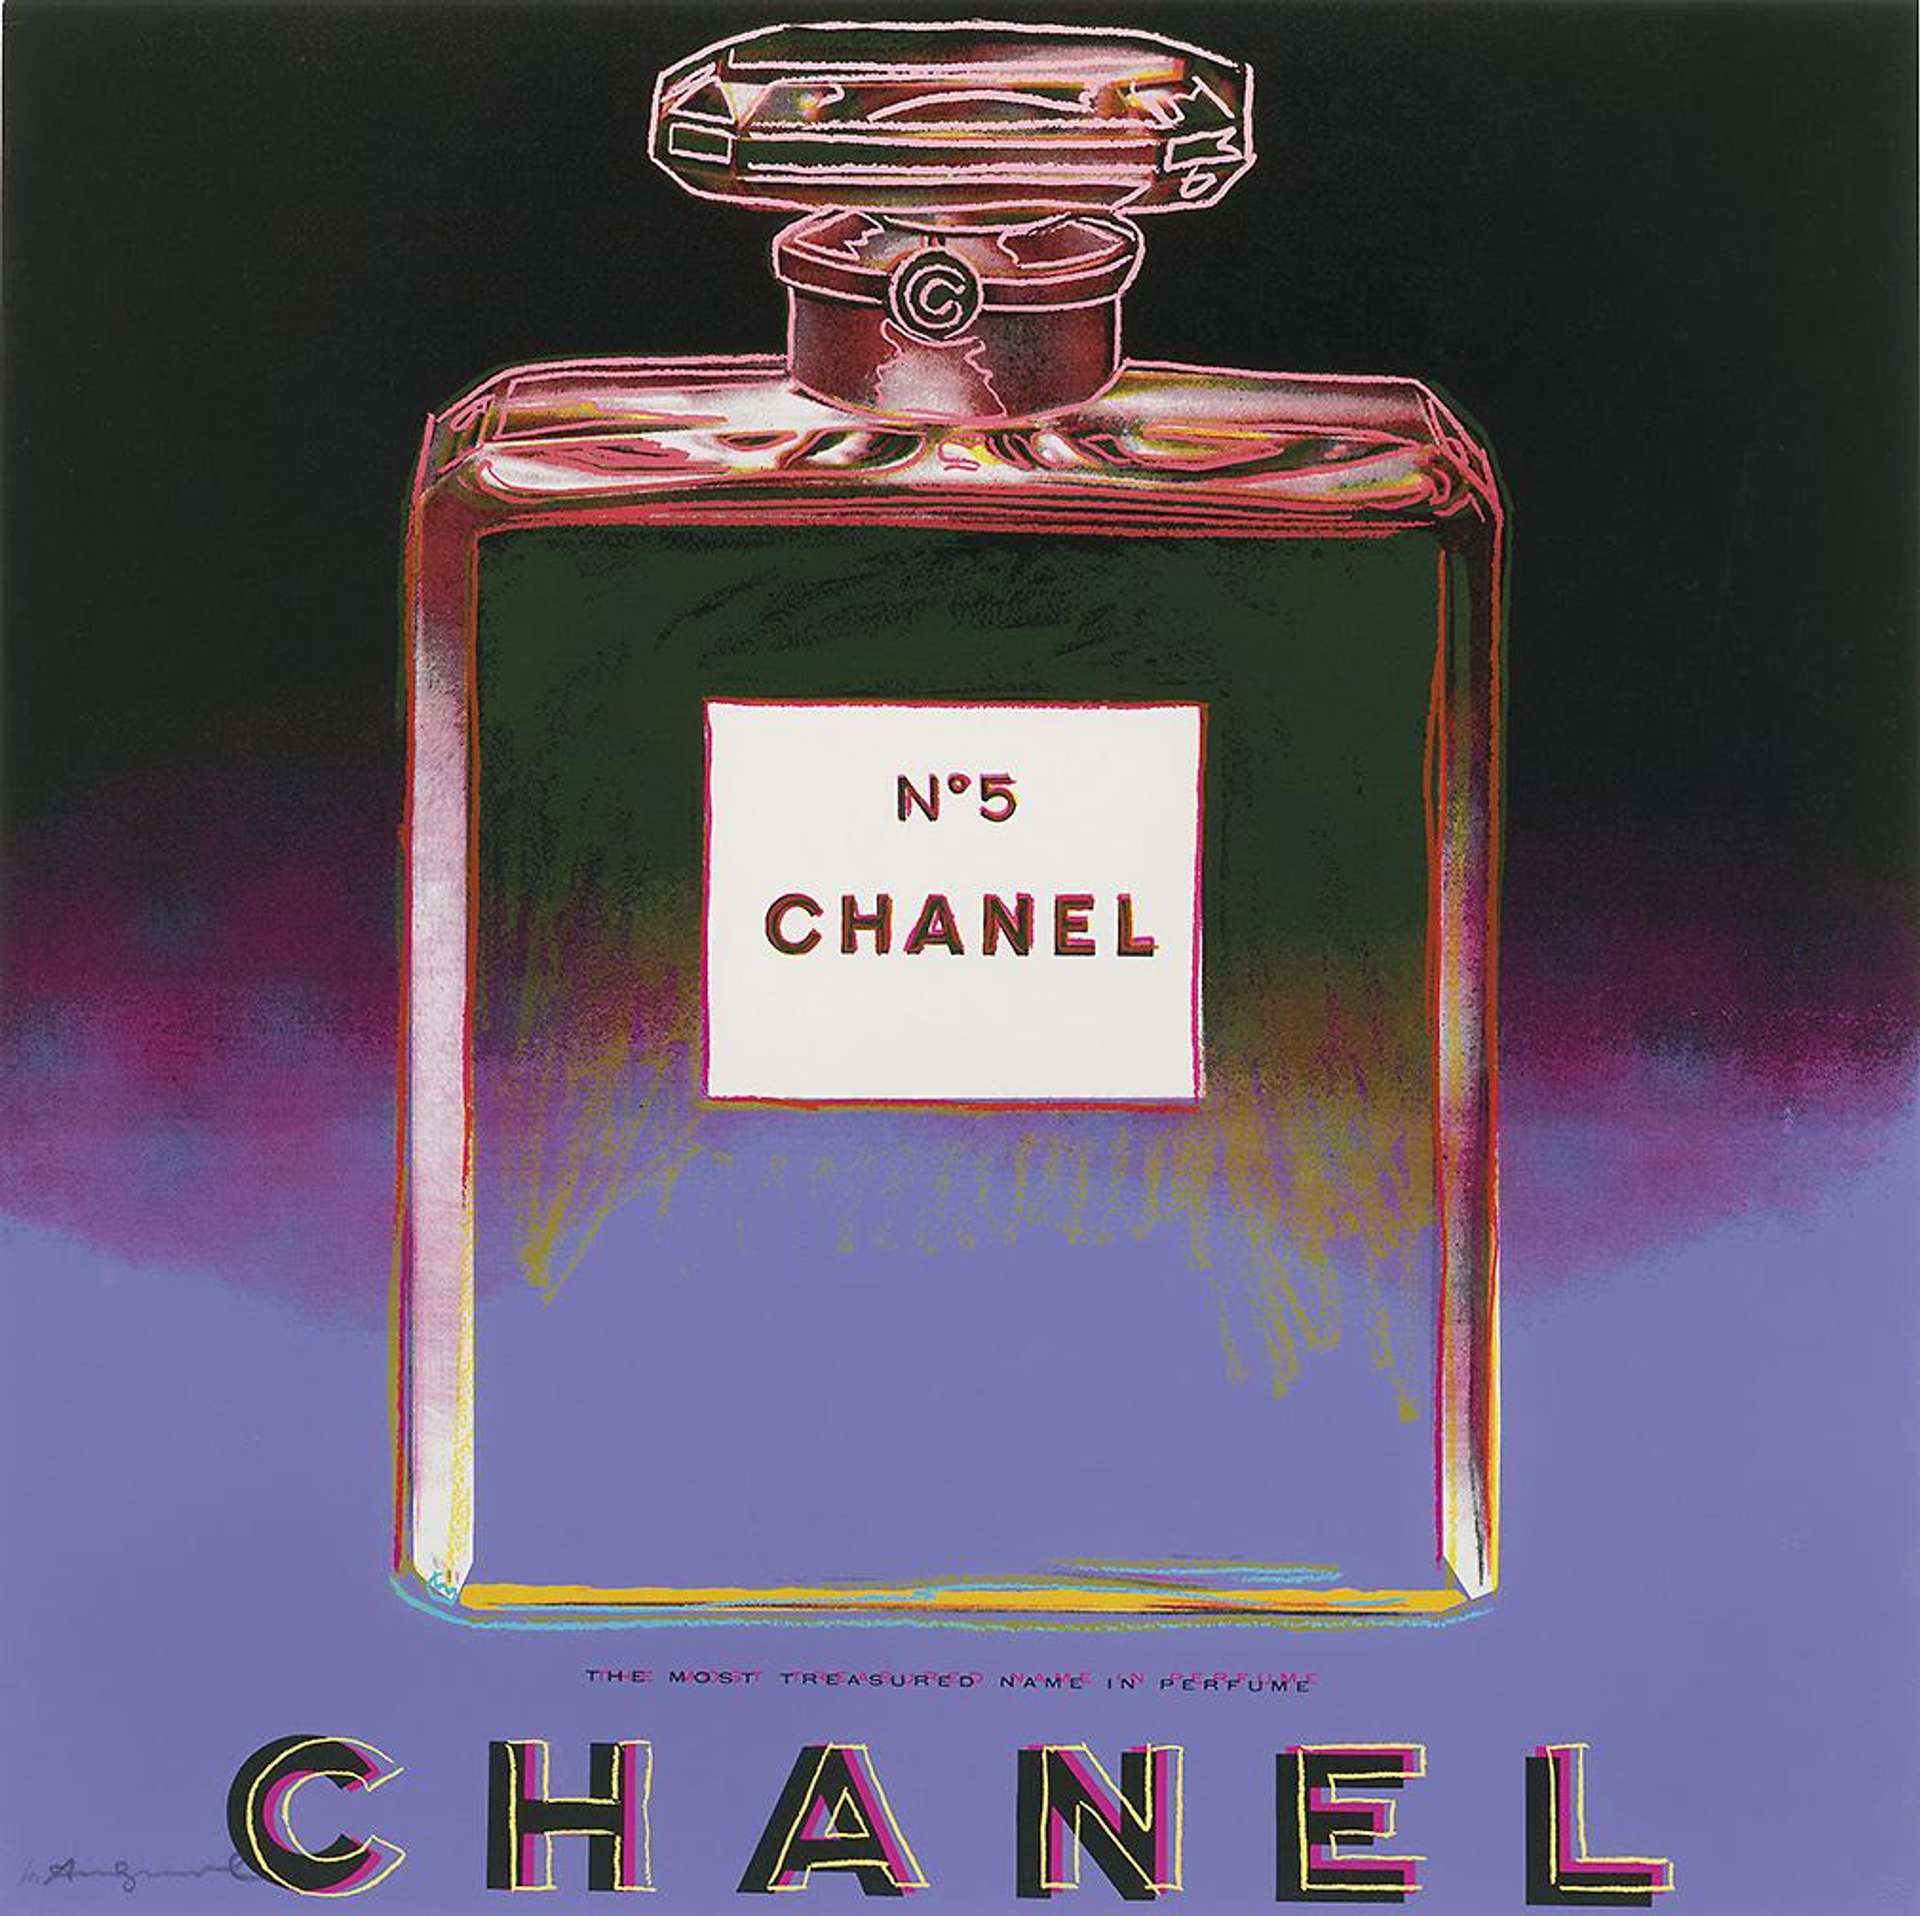 A Chanel No. 5 perfume bottle appears at the centre of the composition, outlines in pink against a purple background. The brand name Chanel appears in type at the bottom of the work